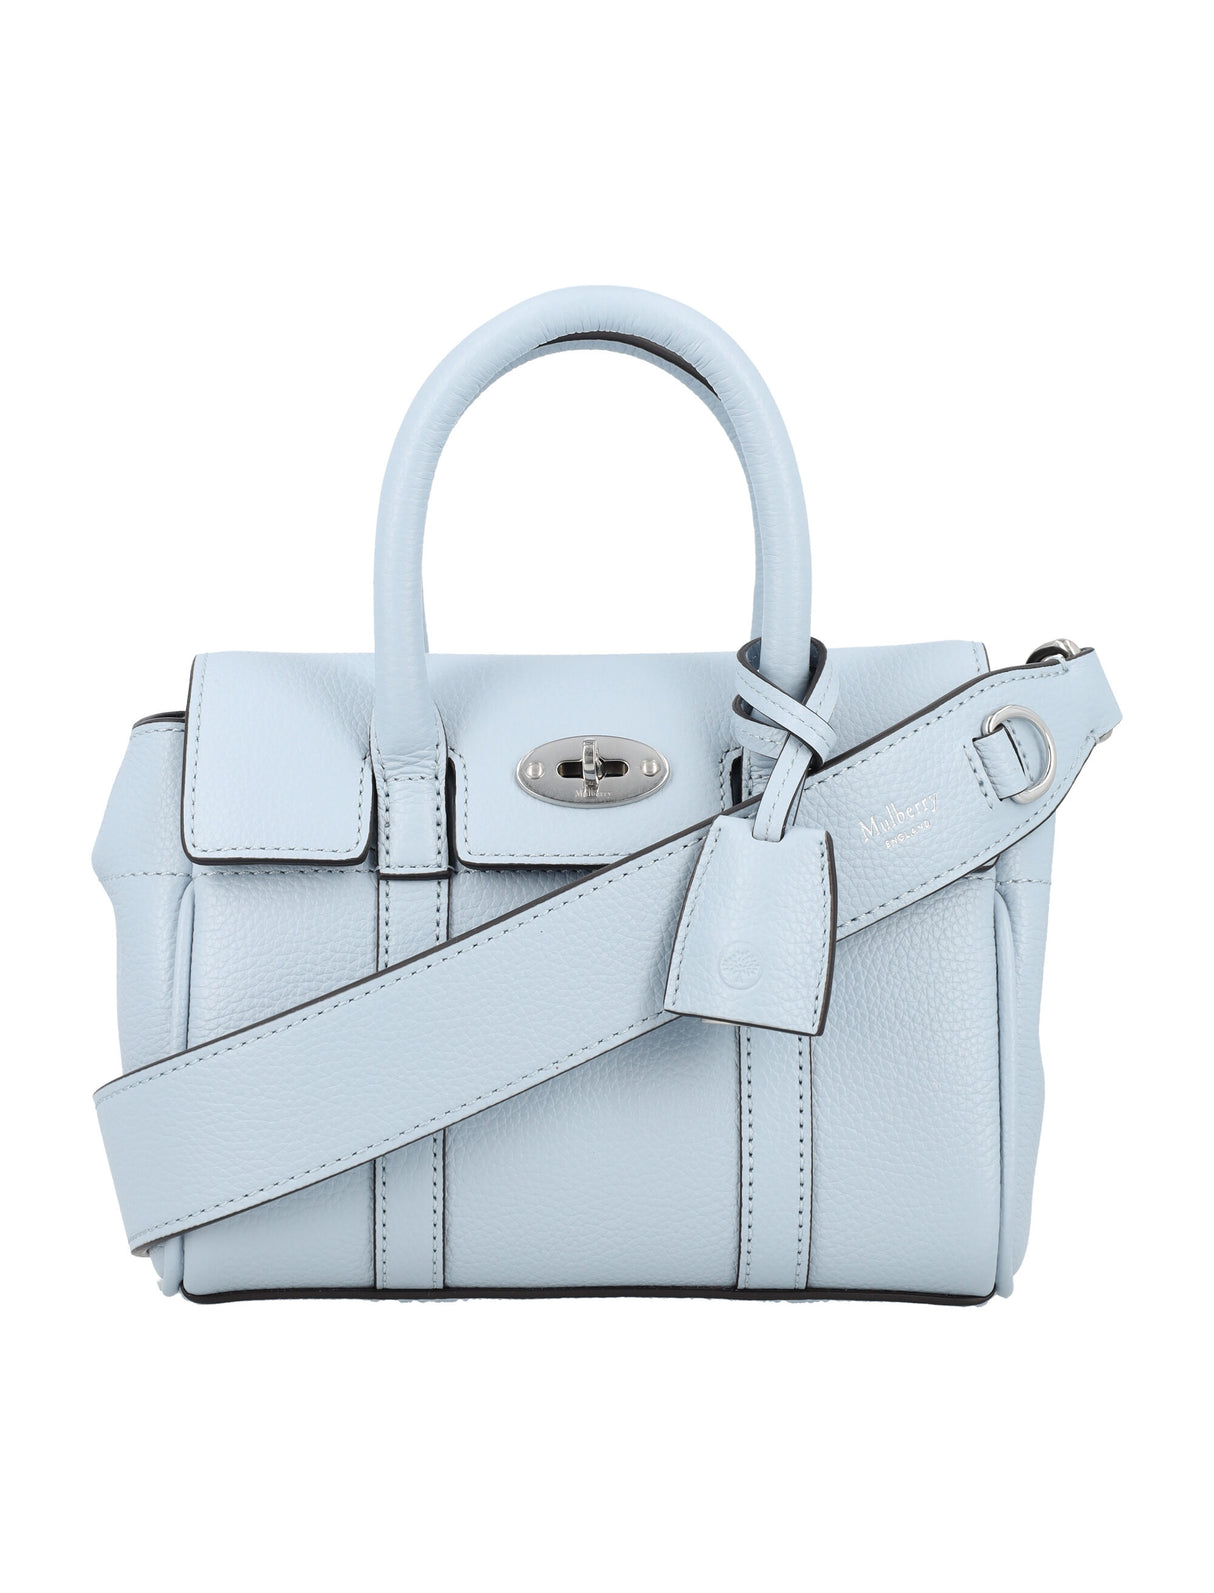 MULBERRY Mini Bayswater Poplin Blue Leather Handbag with Silver-Tone Accents - 18.5 x 12.5 x 8 cm